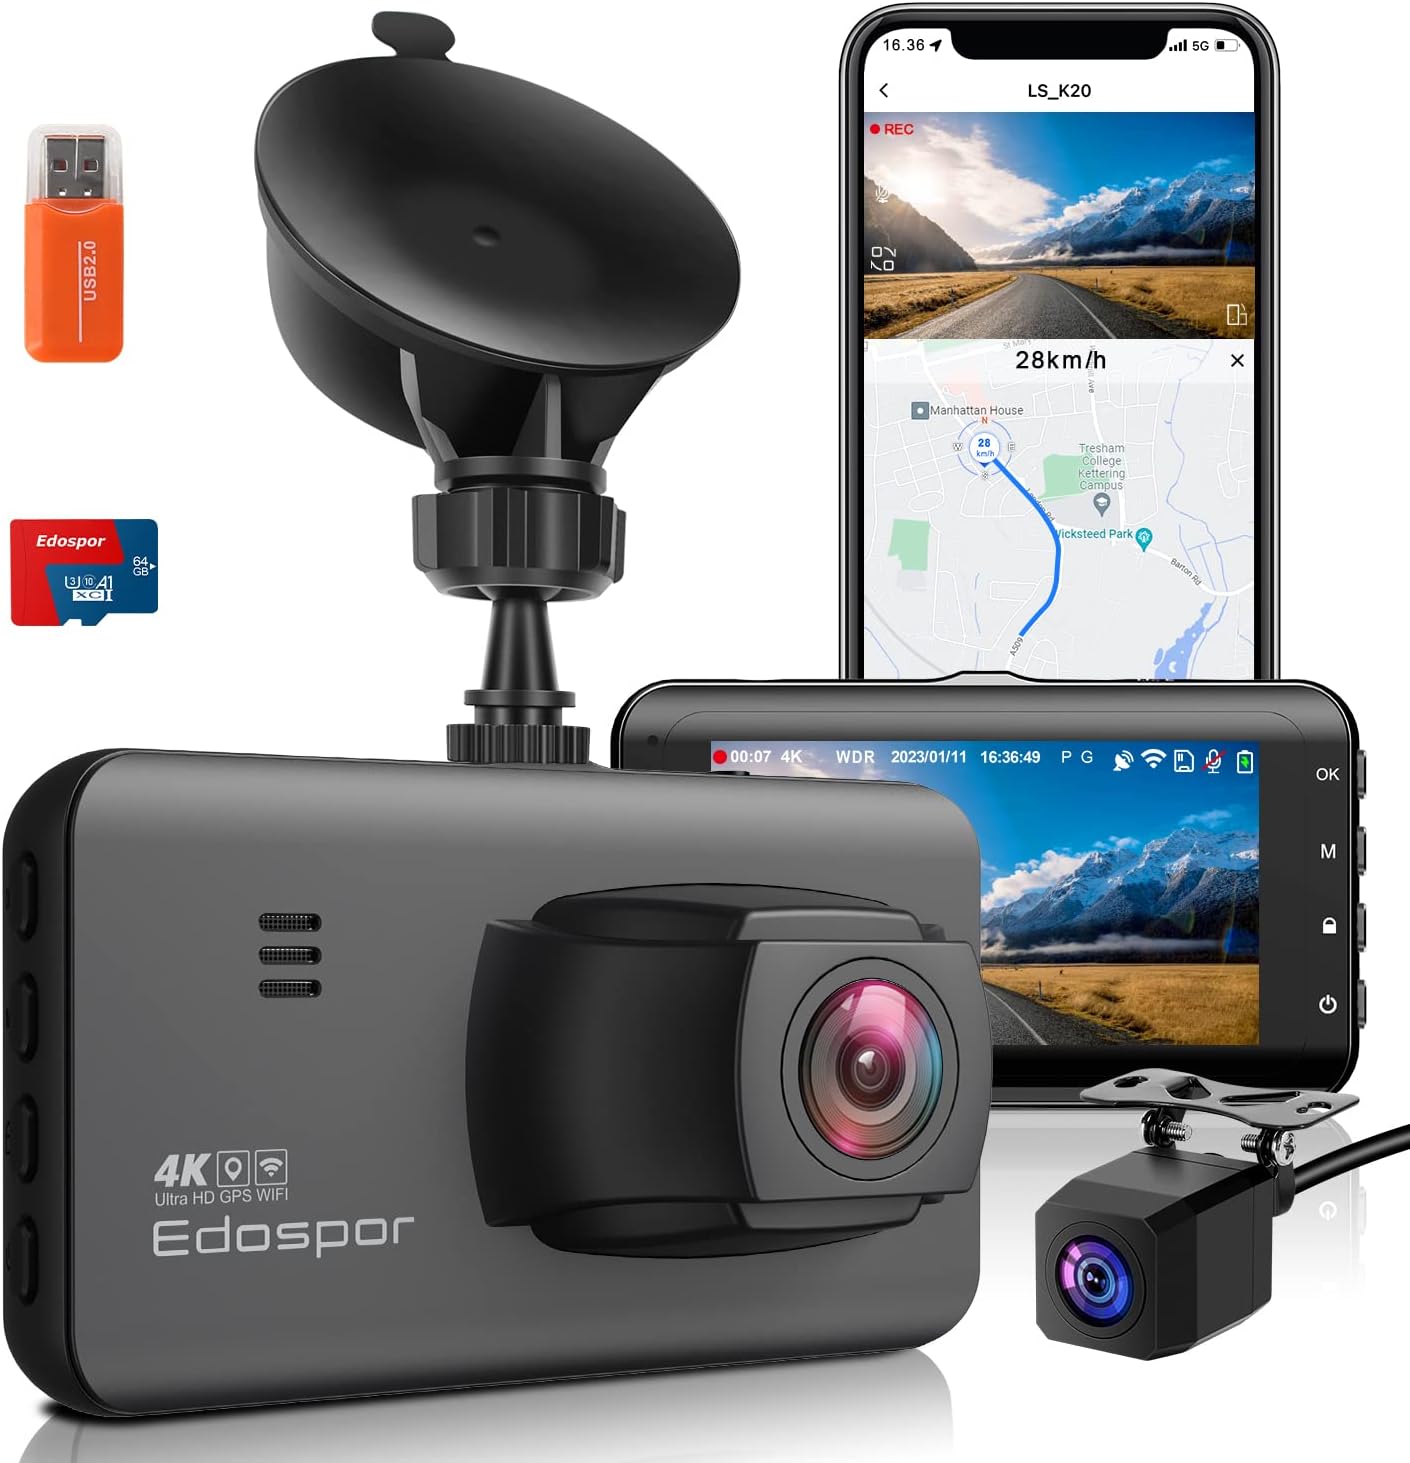 4K Dash Cam Front and Rear(1080P FHD) with GPS  WiFi, Dual Dashcam for Car with Super Night Vision, Parking Mode, 64G SD Card, 170° Wide Angle, G-Sensor,3 IPS Display, APP Control, Support 256GB Max